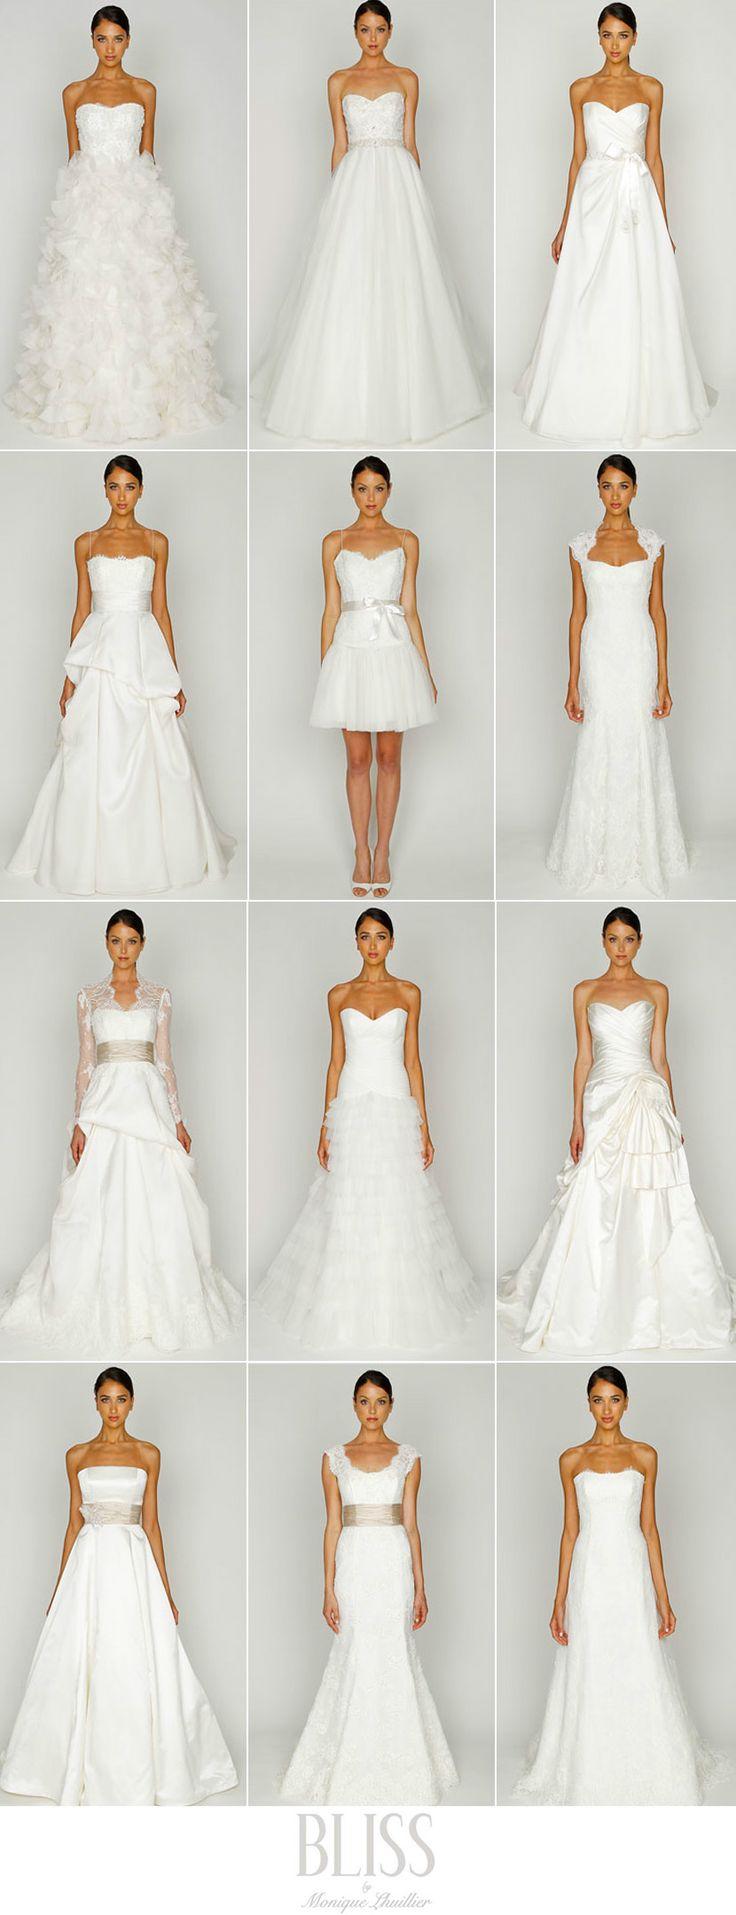 Wedding - Wedding Dress Shapes - Good Guide To Look At Before You Go Hunting For Your Wedding Dress